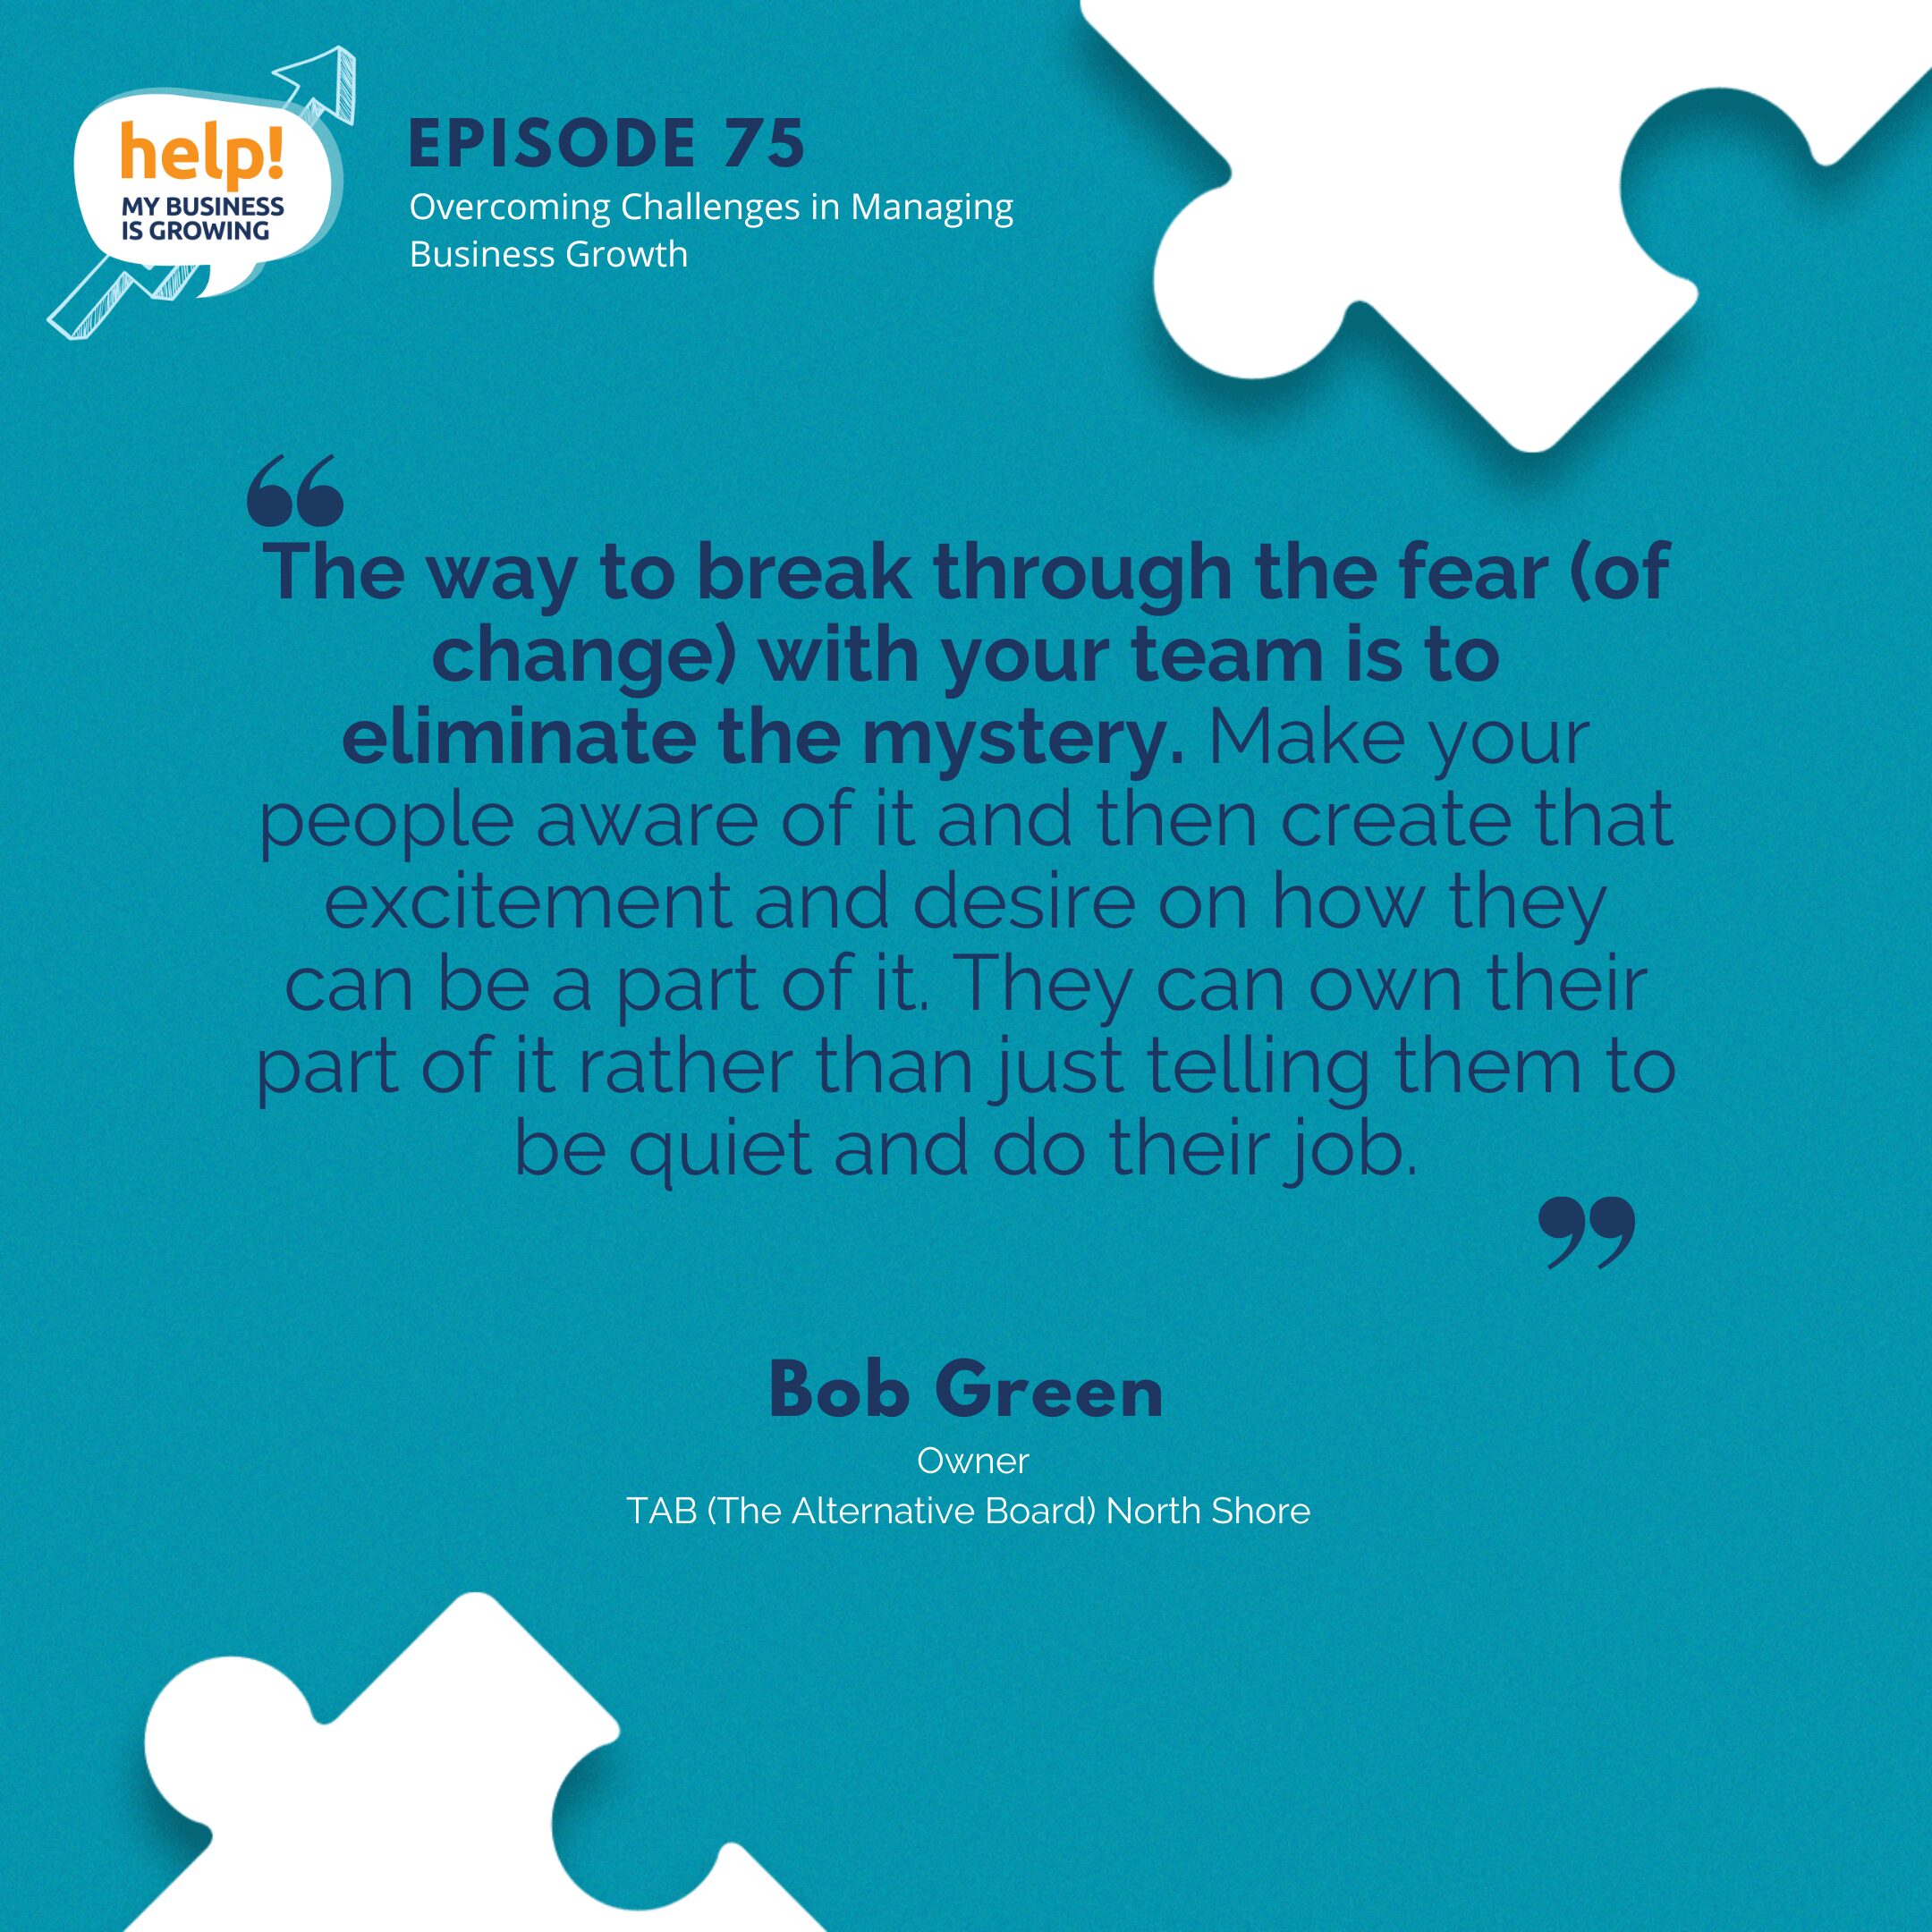 The way to break through the fear (of change) with your team is to eliminate the mystery. Make your people aware of it and then create that excitement and desire on how they can be a part of it. They can own their part of it rather than just telling them to be quiet and do their job.